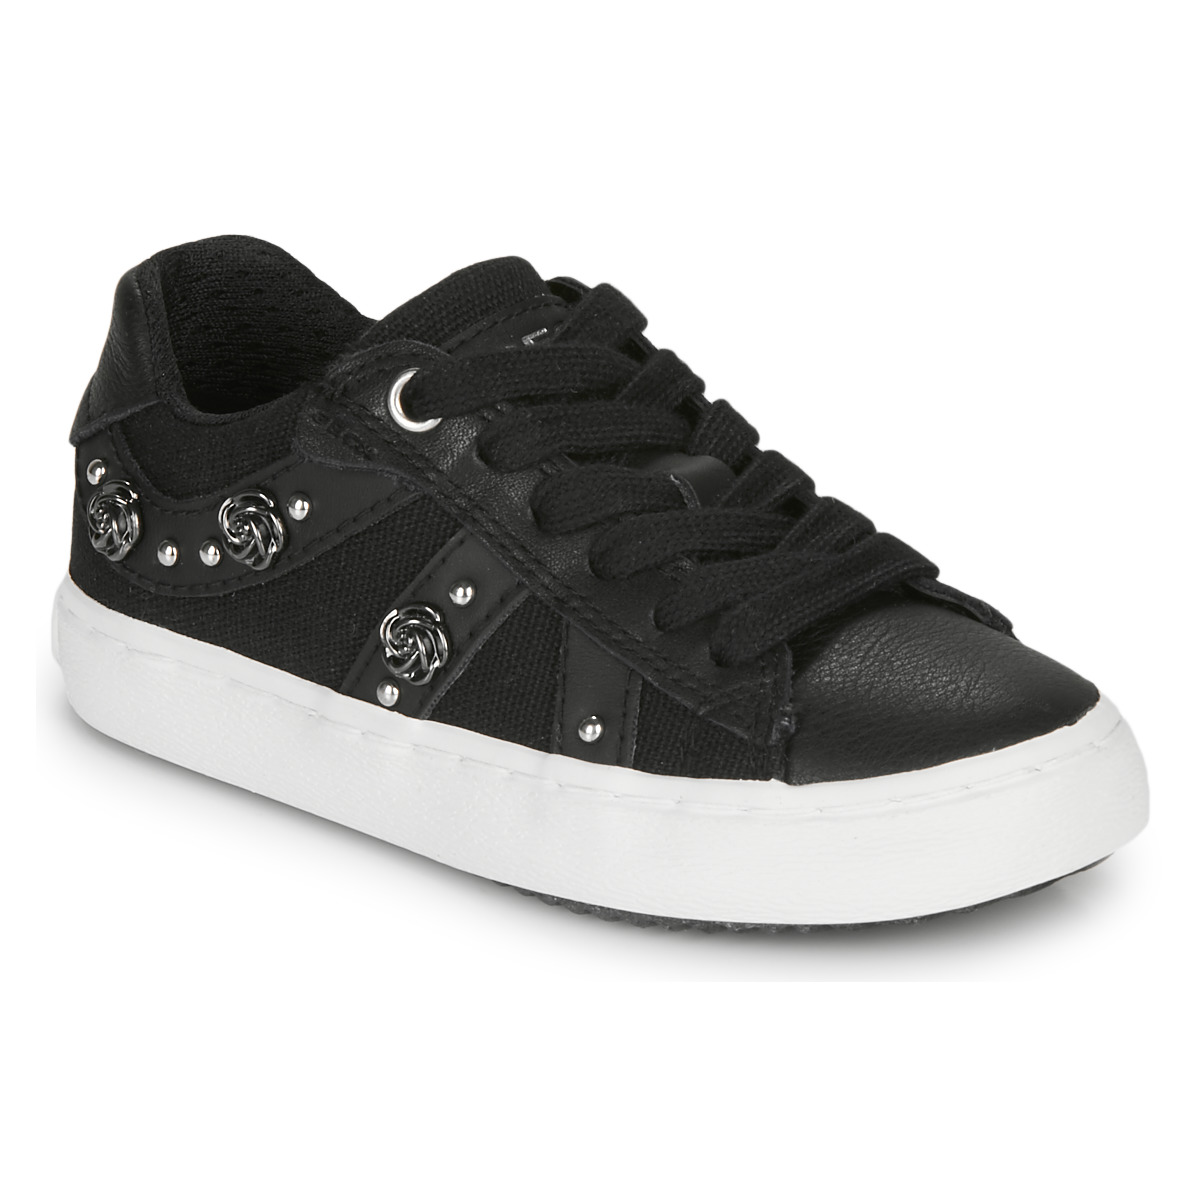 Chaussures Fille Baskets basses Geox J KILWI GIRL BLACK